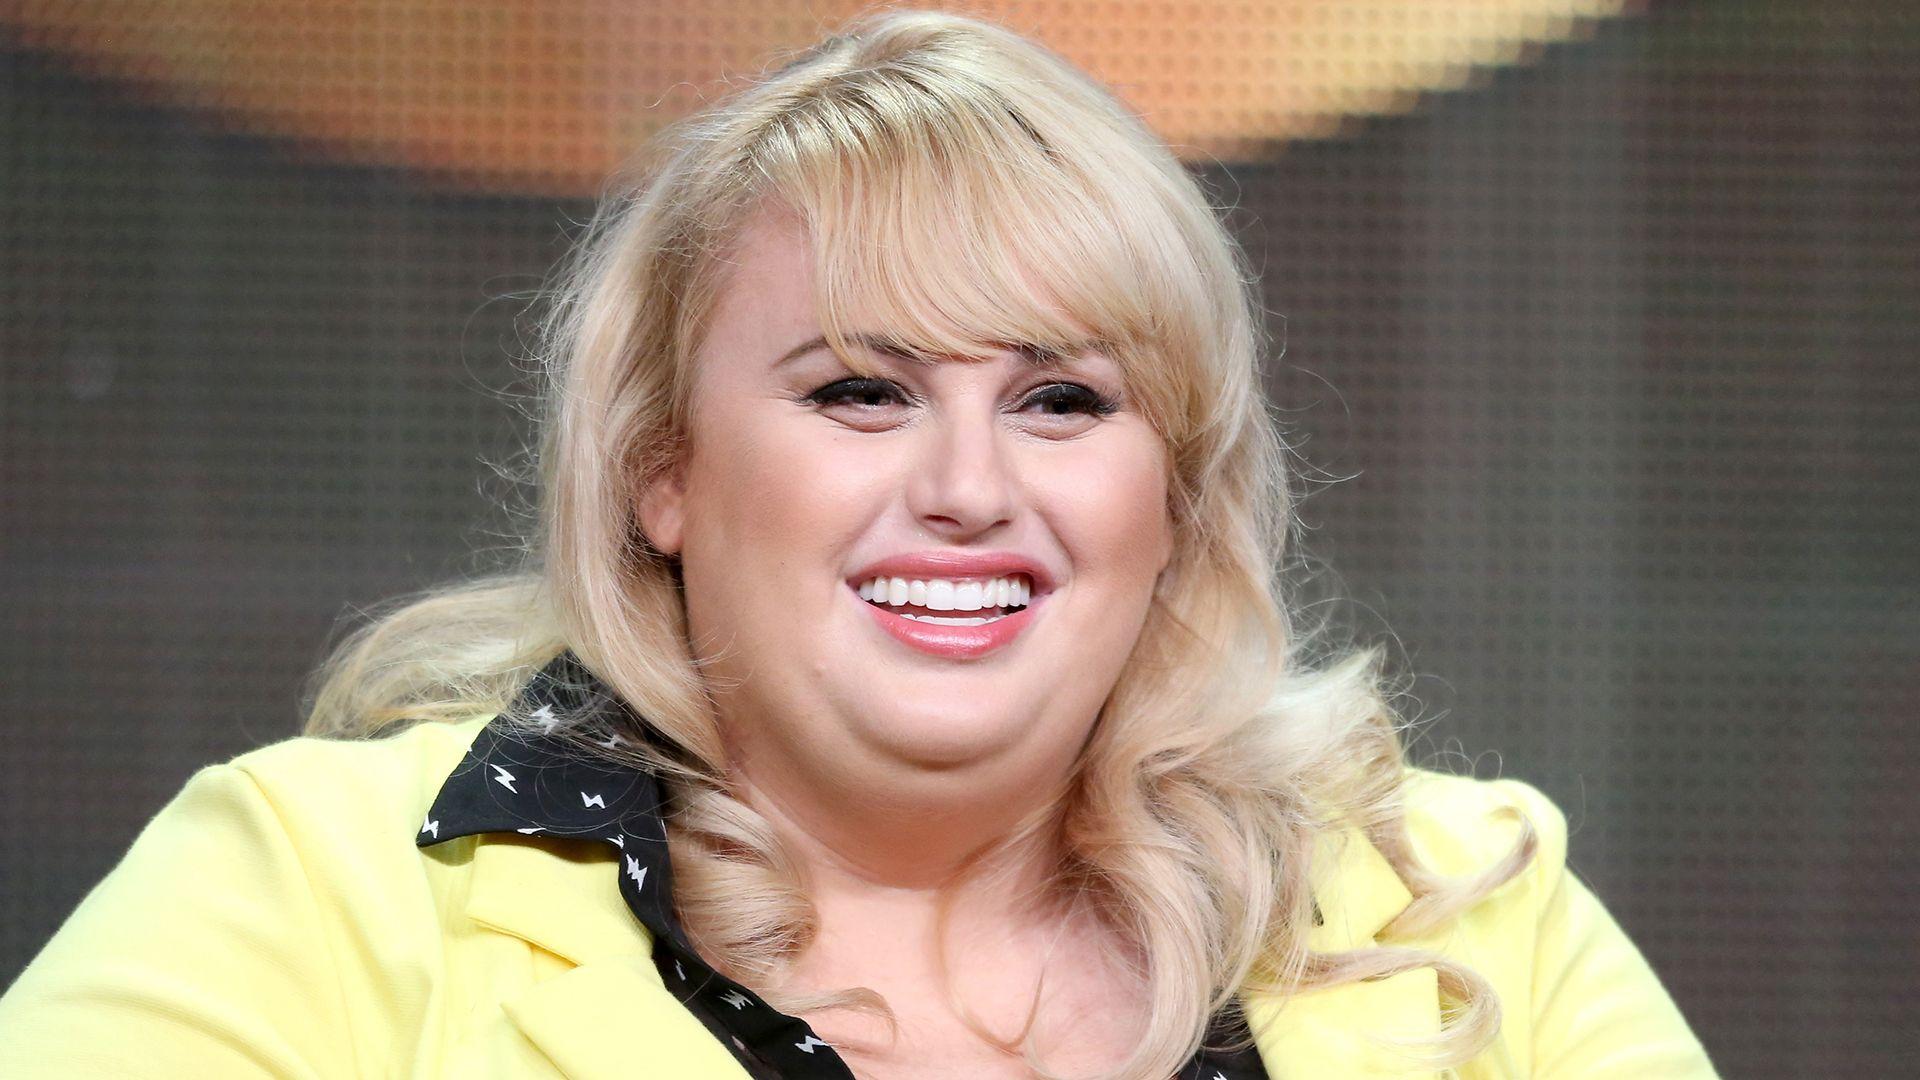 Rebel Wilson reportedly feels no pressure in Hollywood to lose